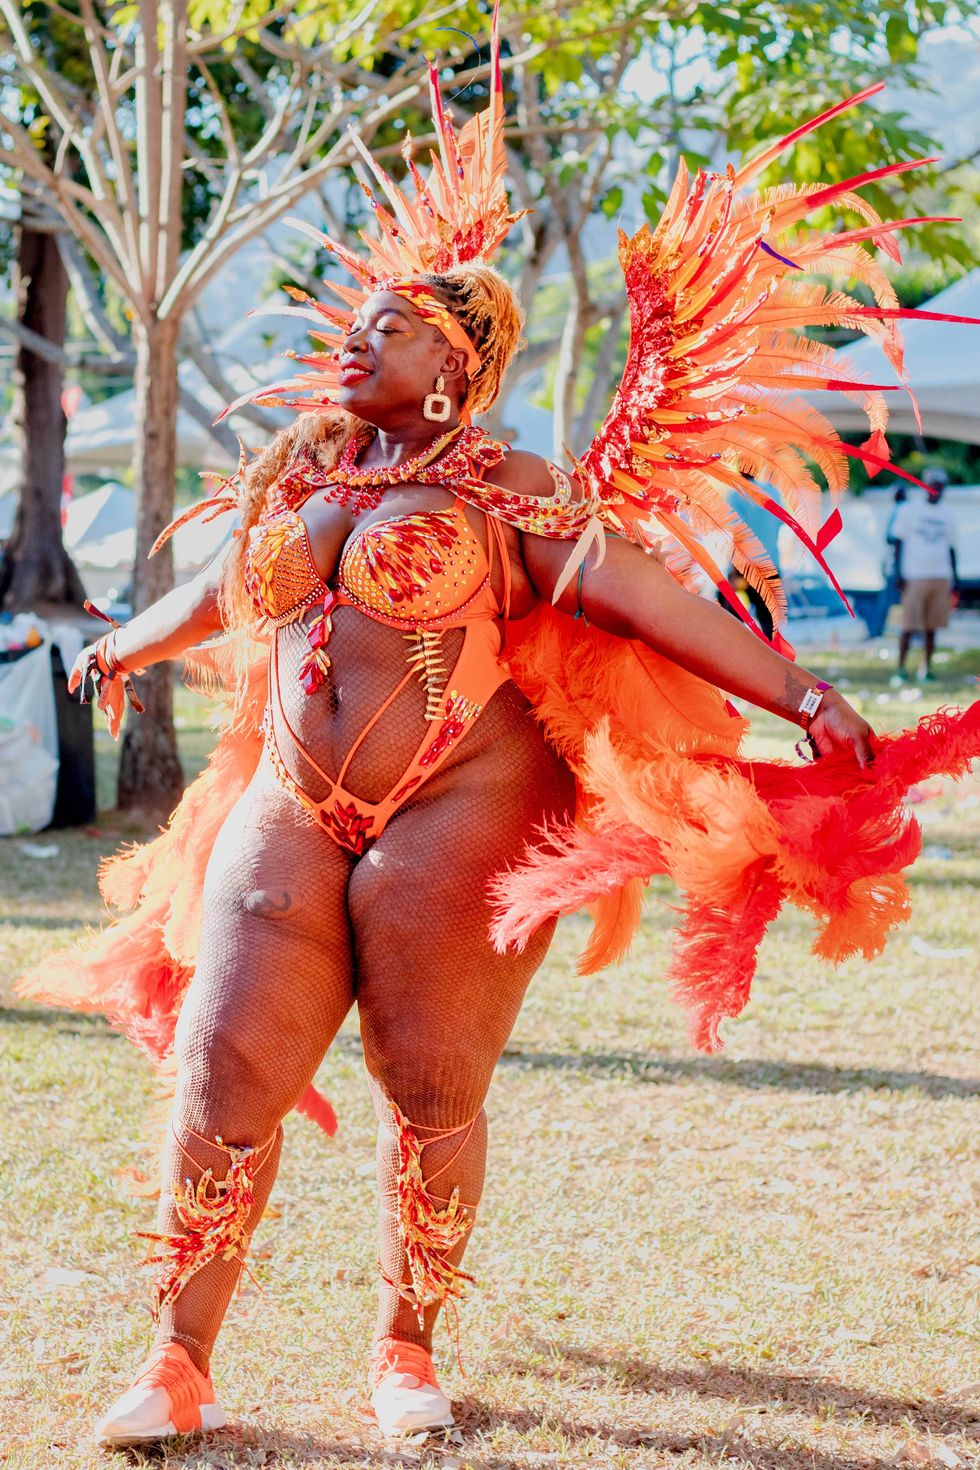 Every 'body' plays mas Carnival embraces full-figured women